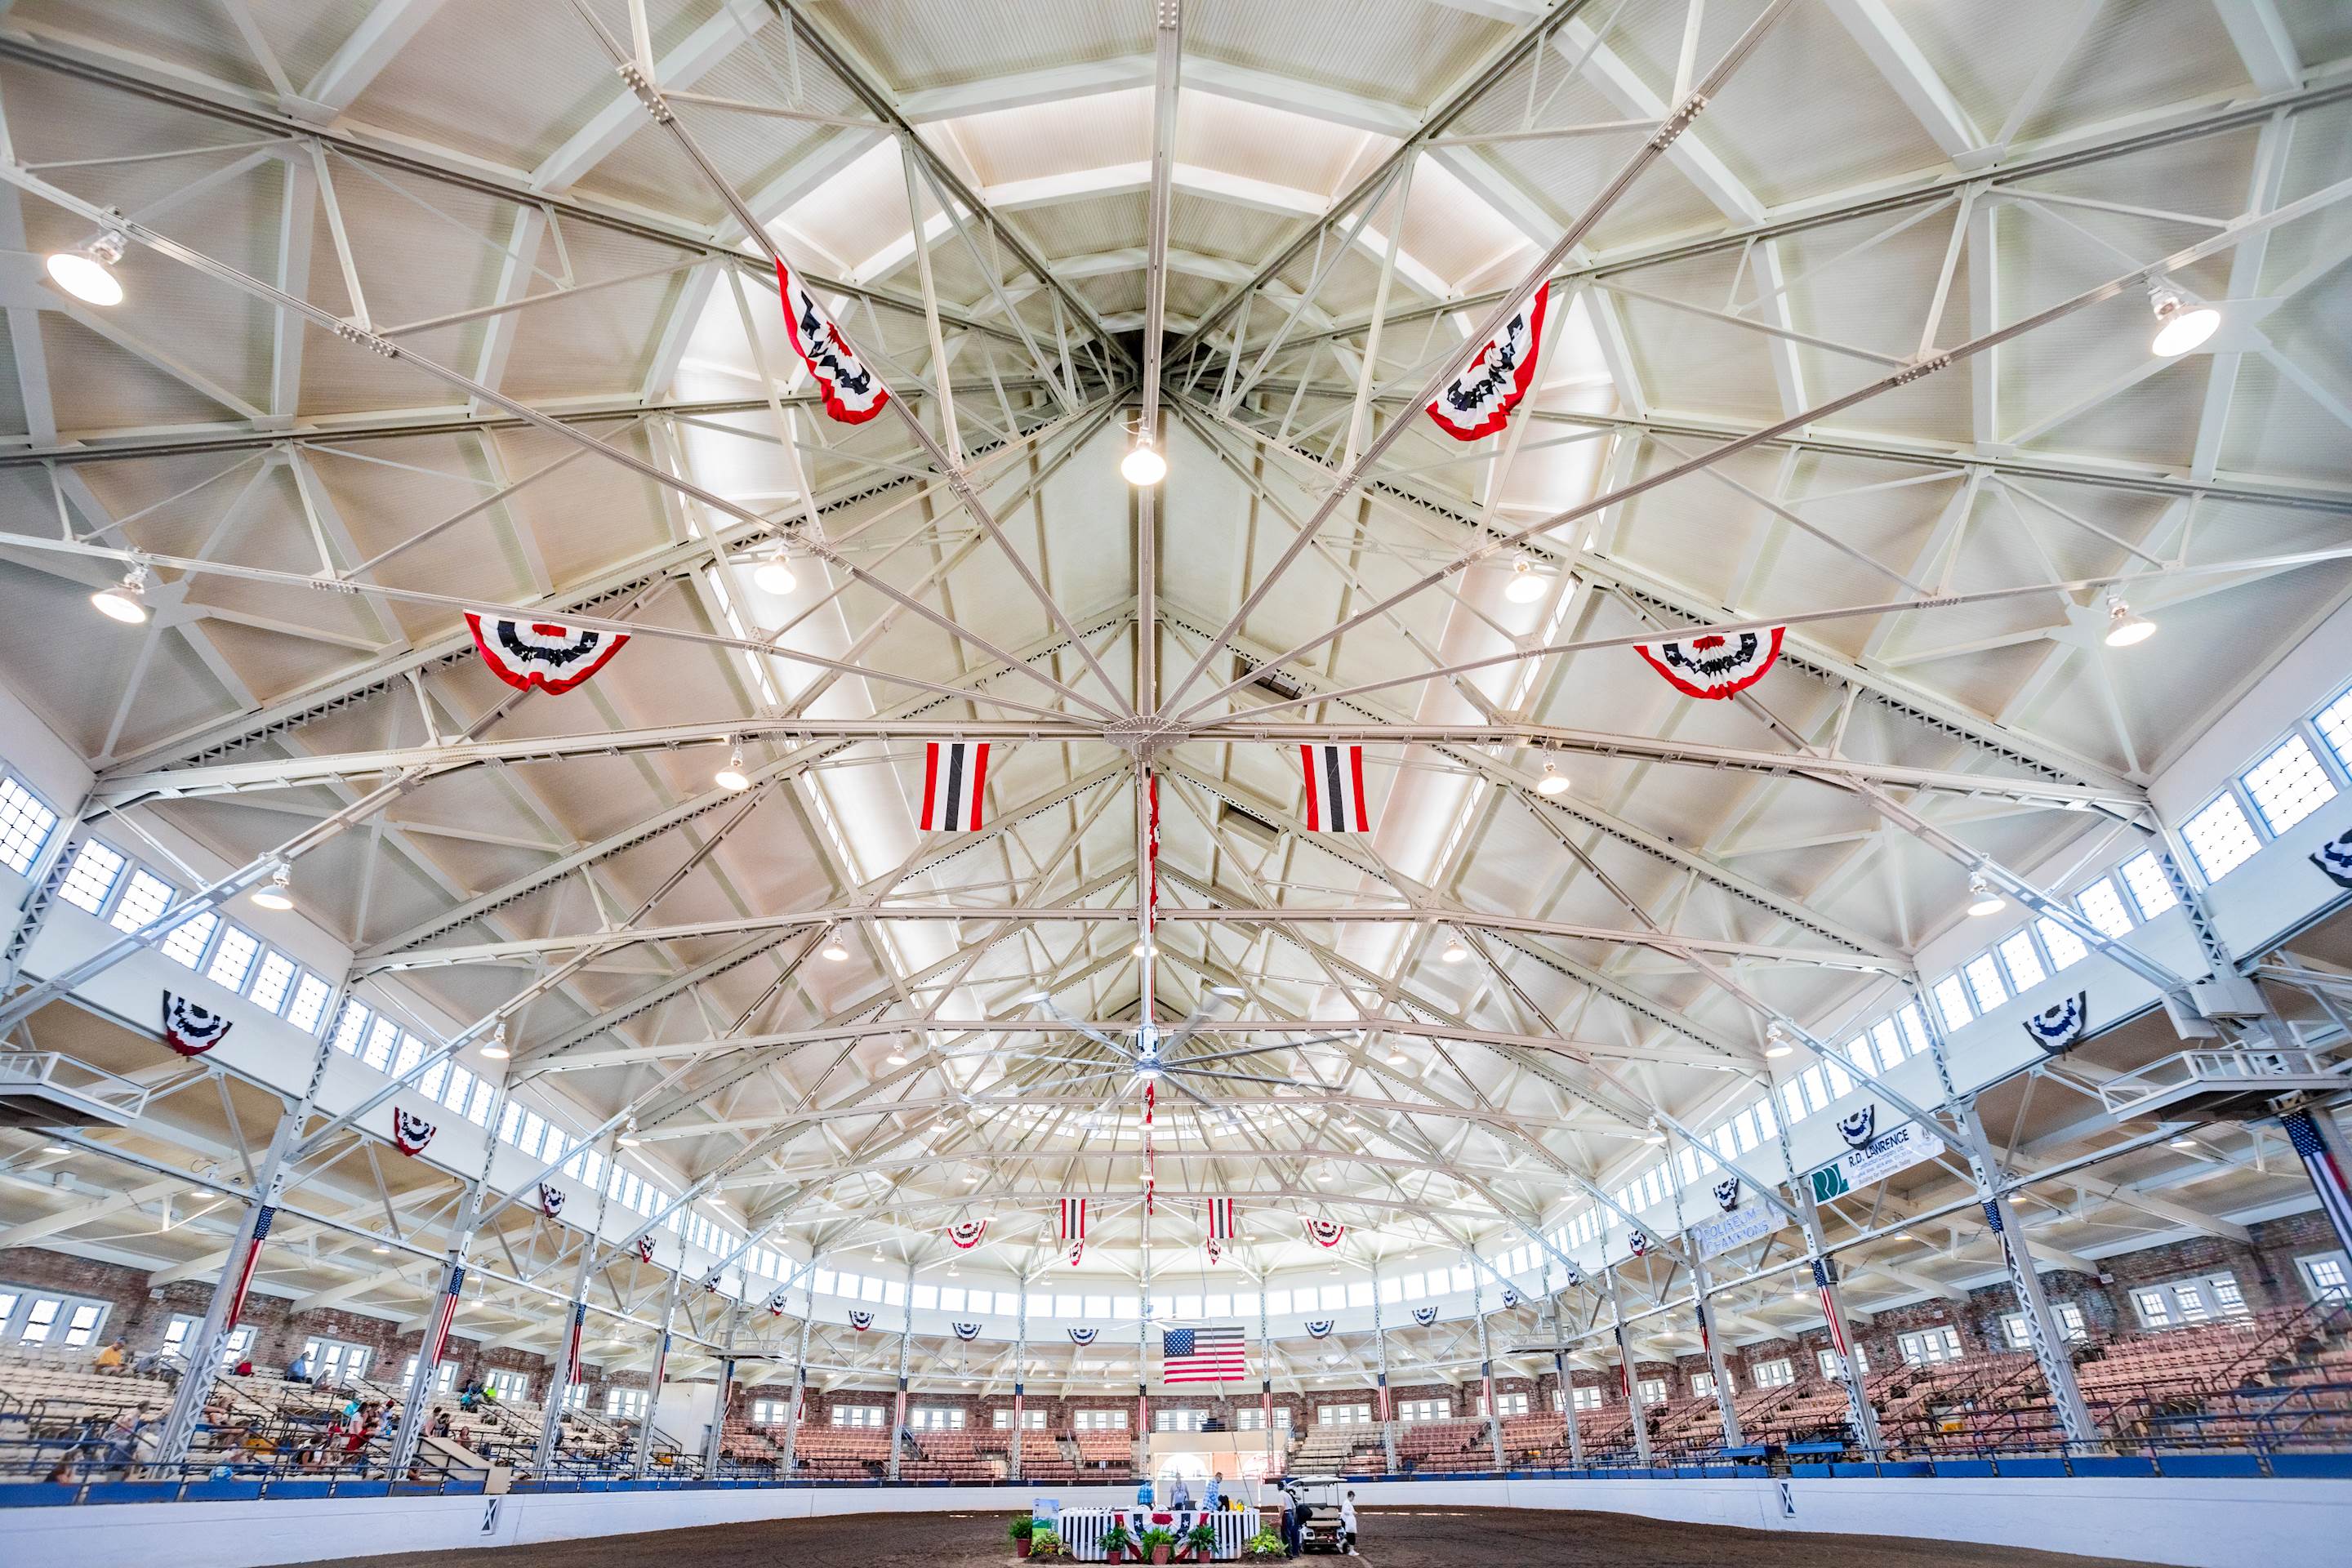 Interior view of the Coliseum during a horse show at the 2019 Illinois State Fair. An oval building with rows of seating around the interior, with a dirt floor and judges' box in the middle.